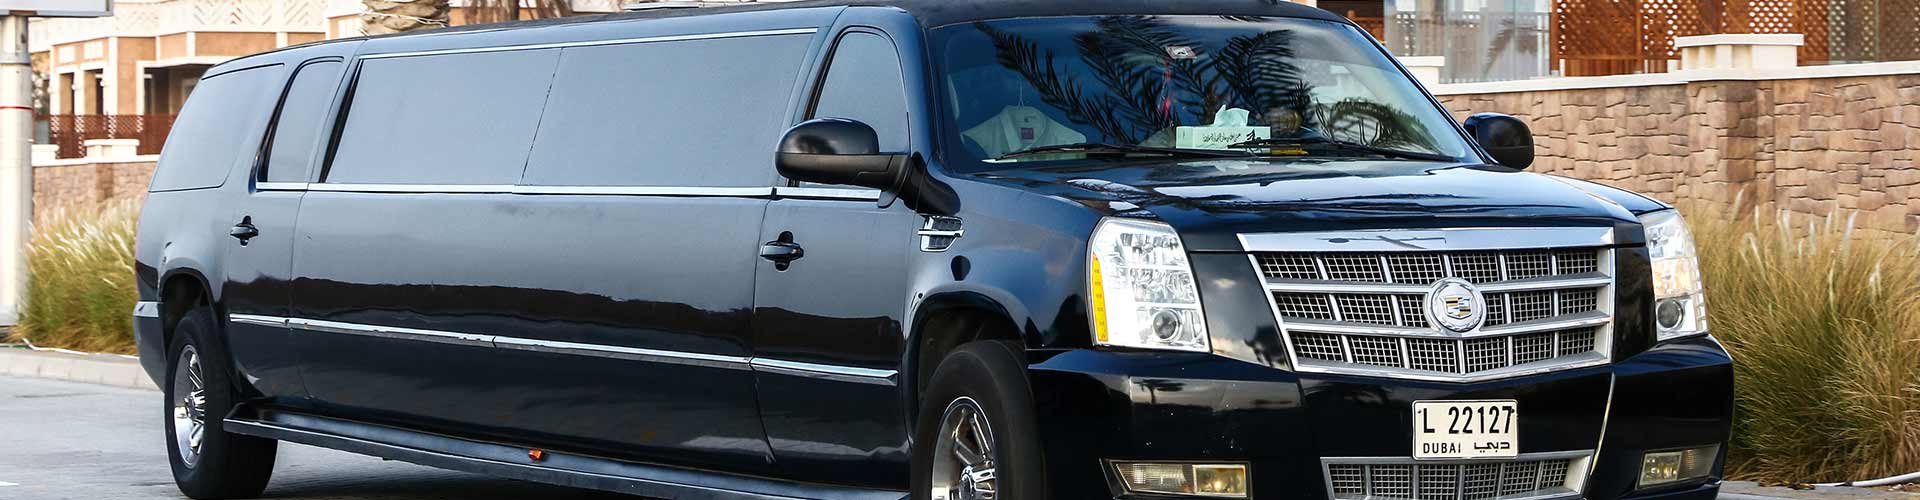 Airport Limousine Pick-up